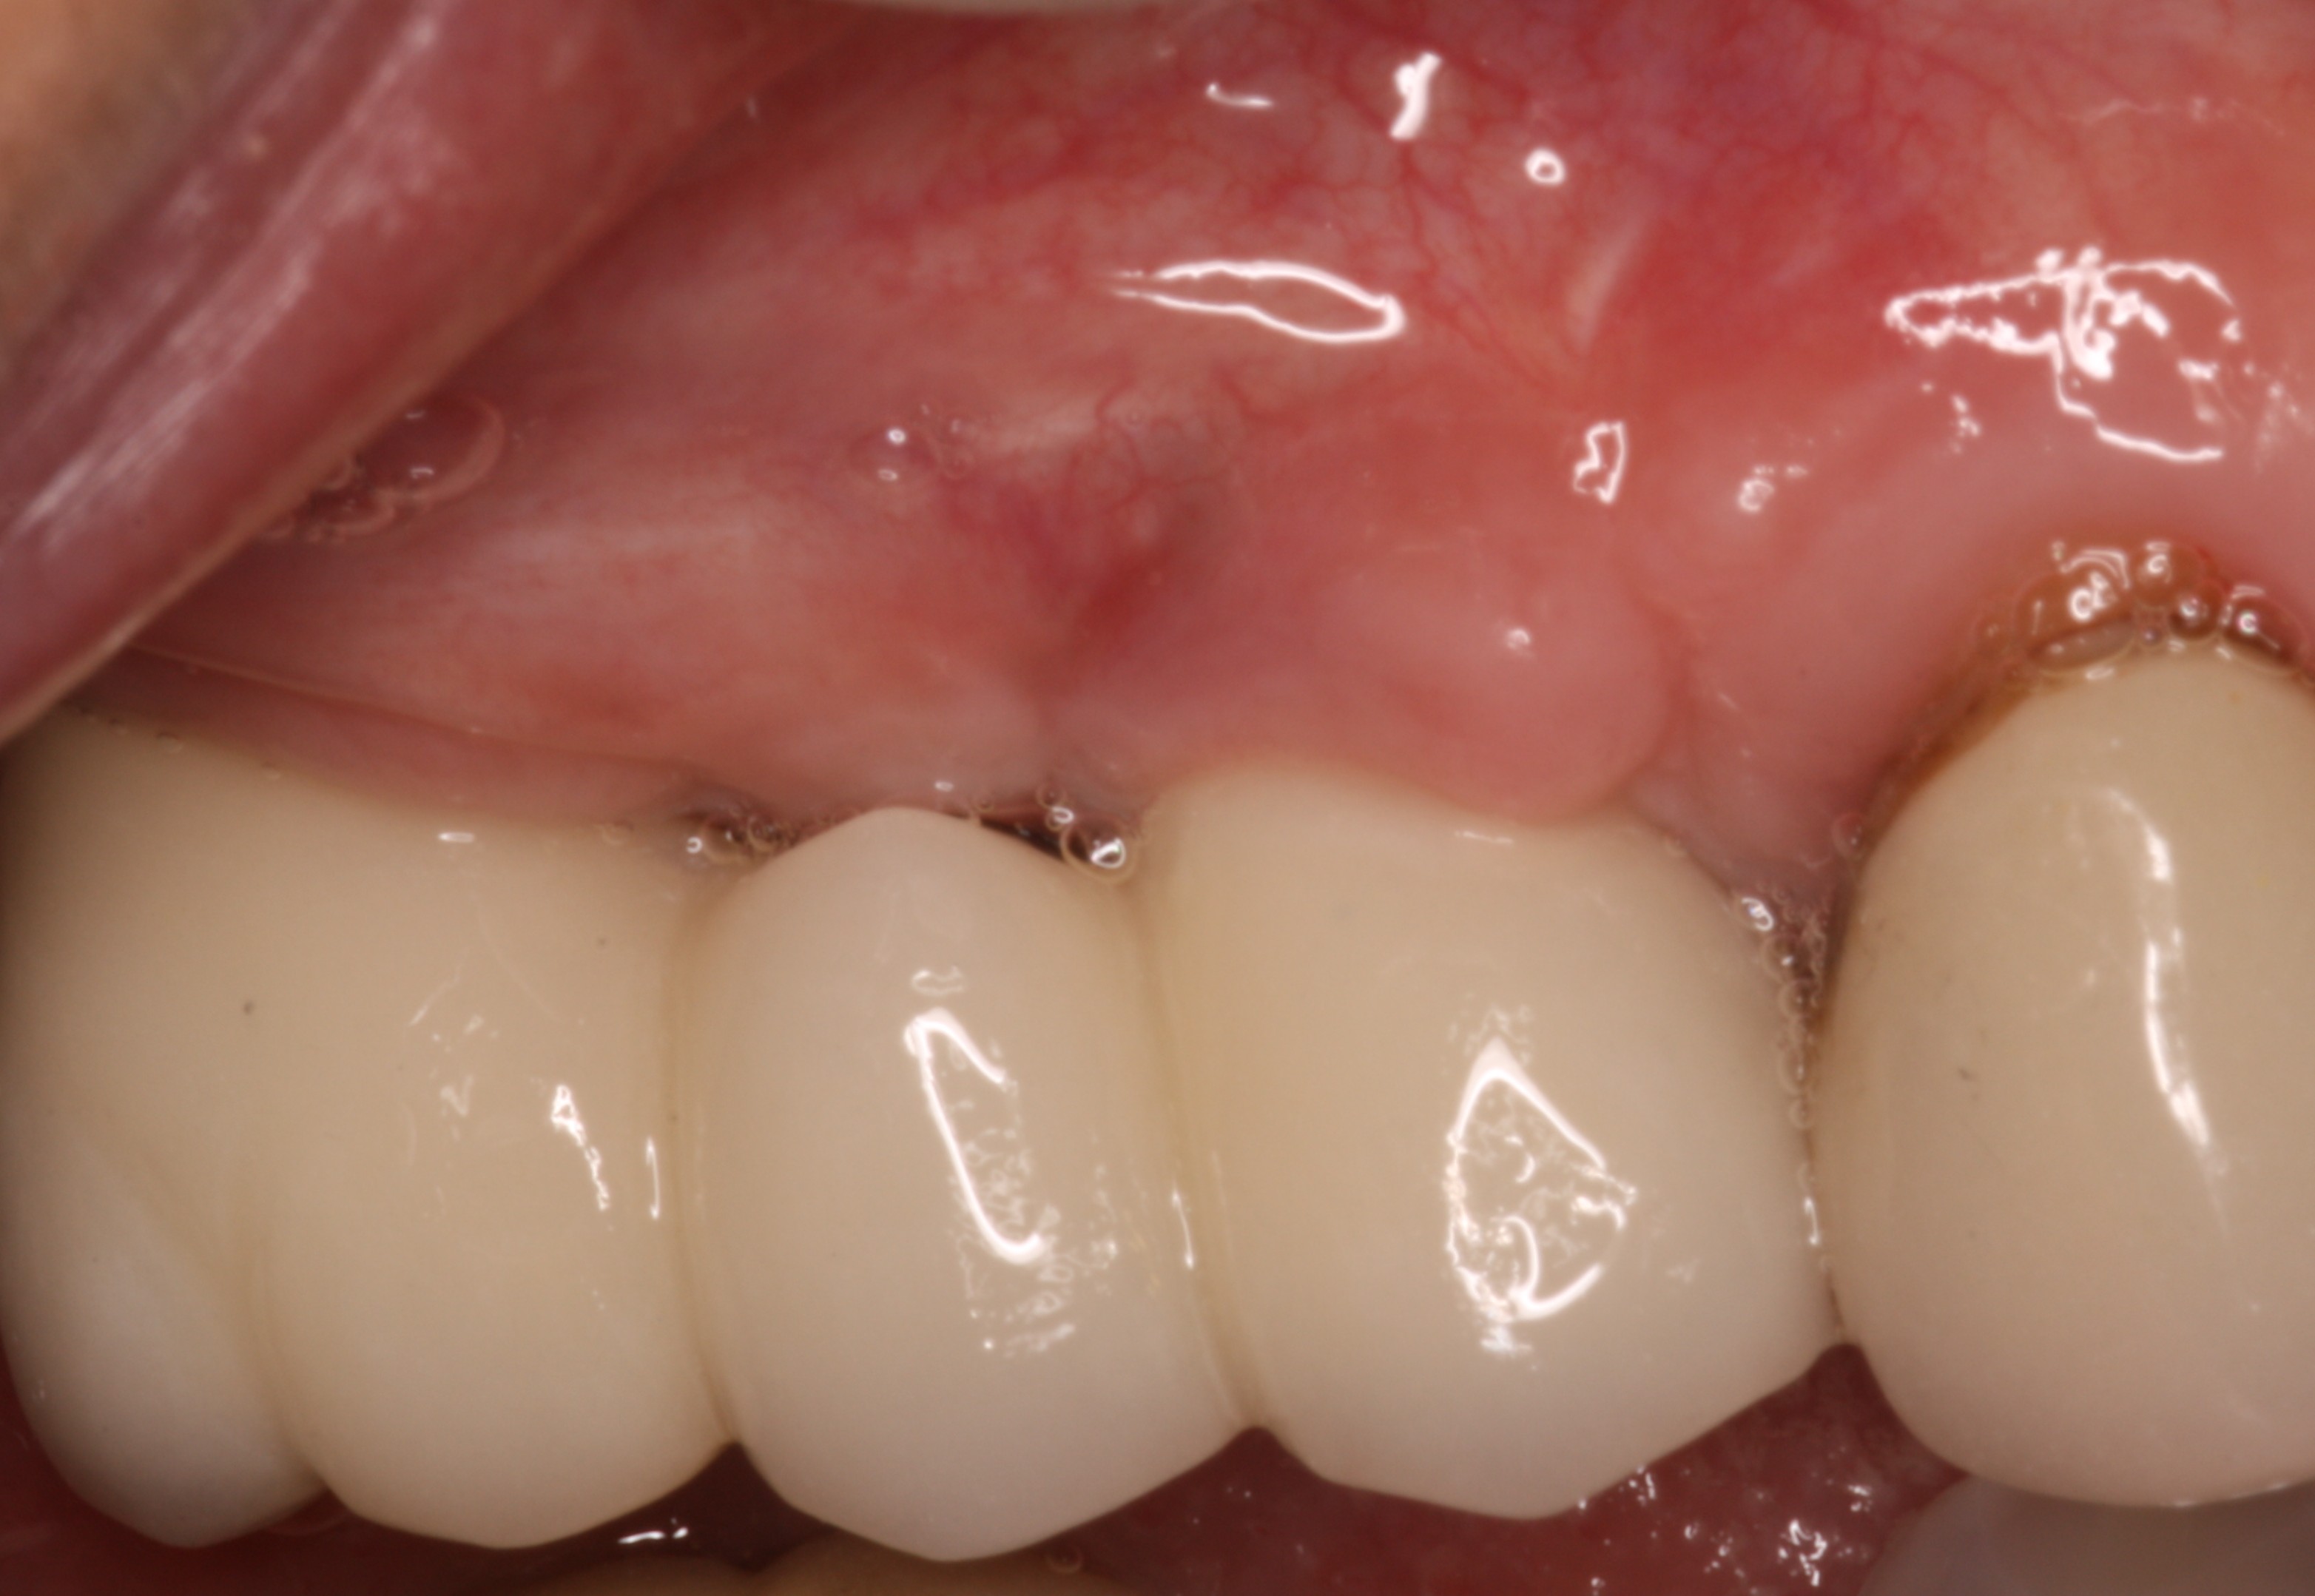 Bridge supported by 2 dental implants.